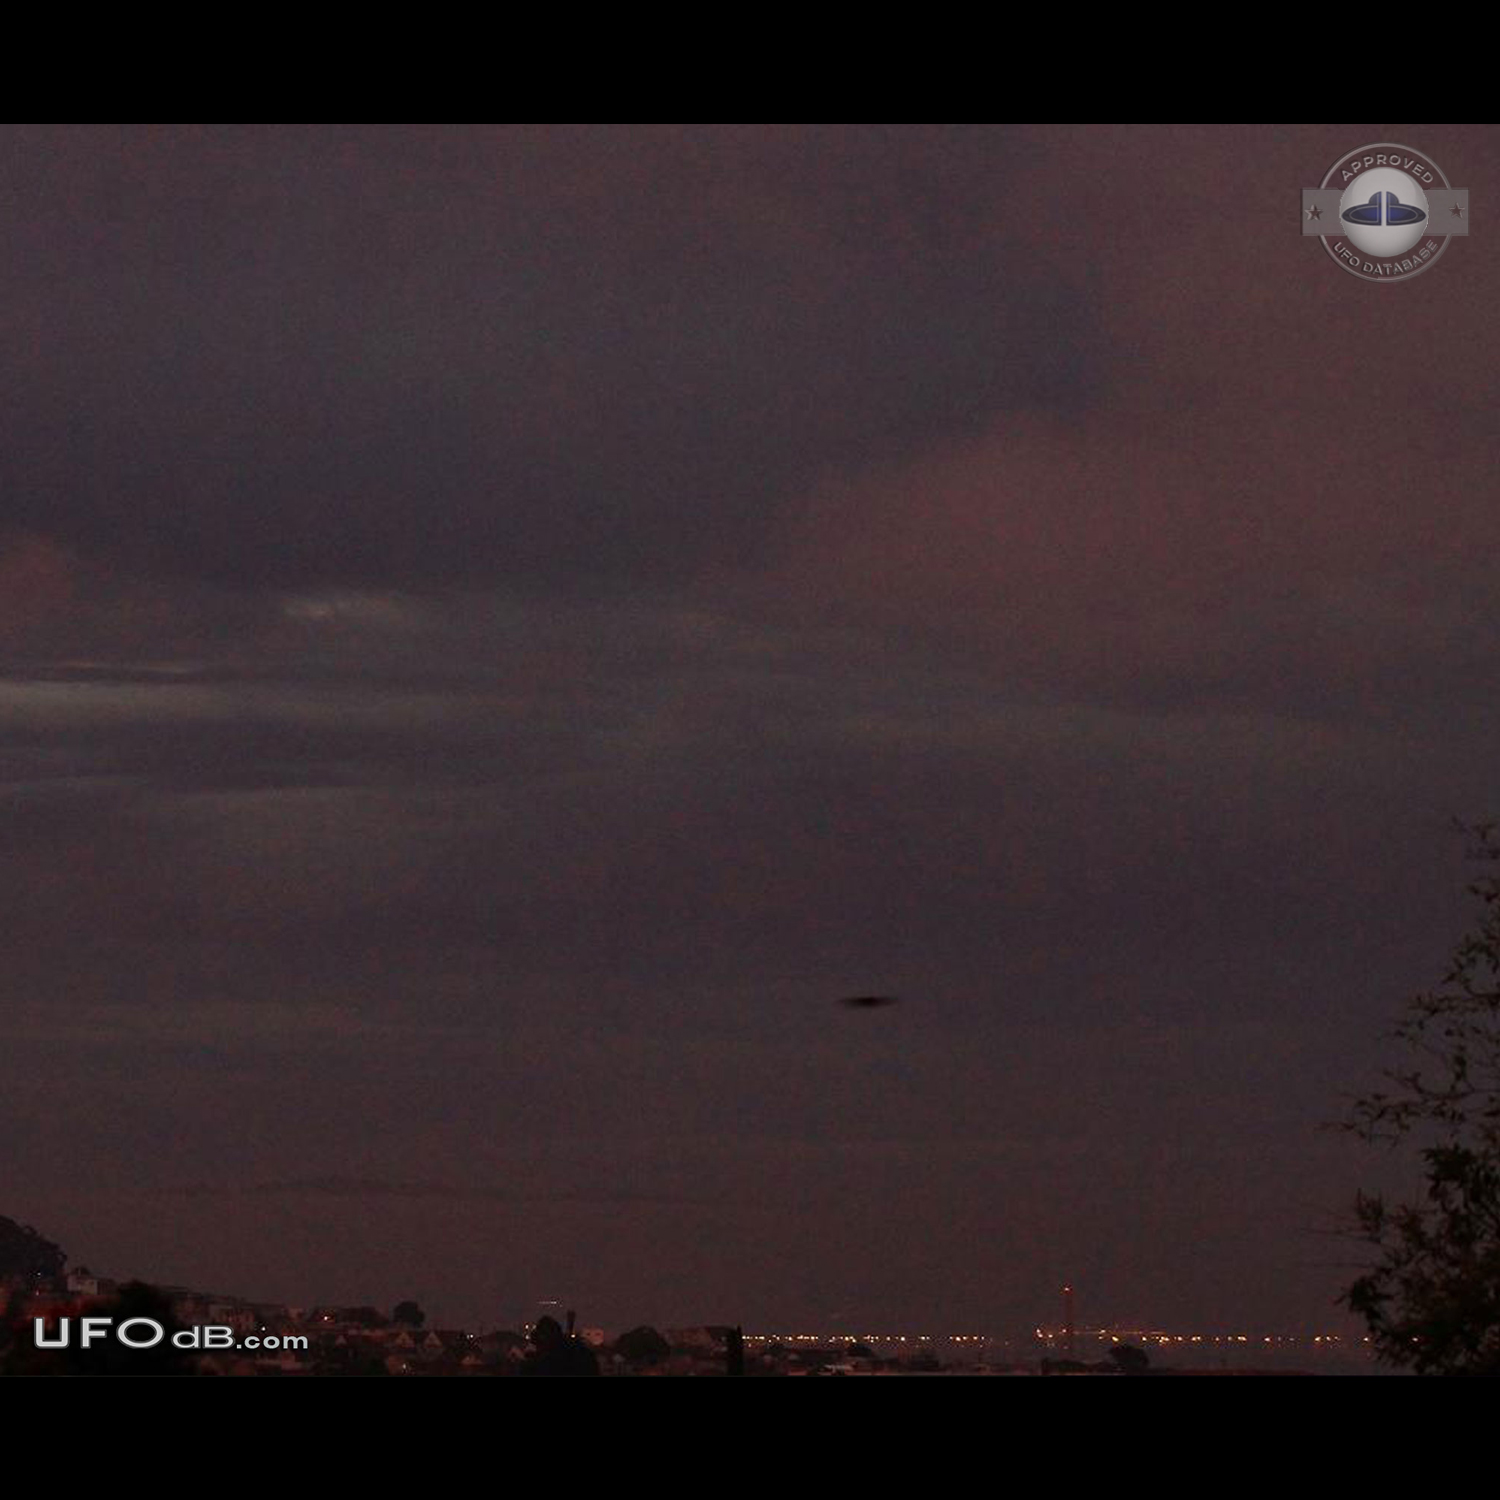 Rainbow Photo get UFO passing over San Fransisco, California USA 2012 UFO Picture #489-1